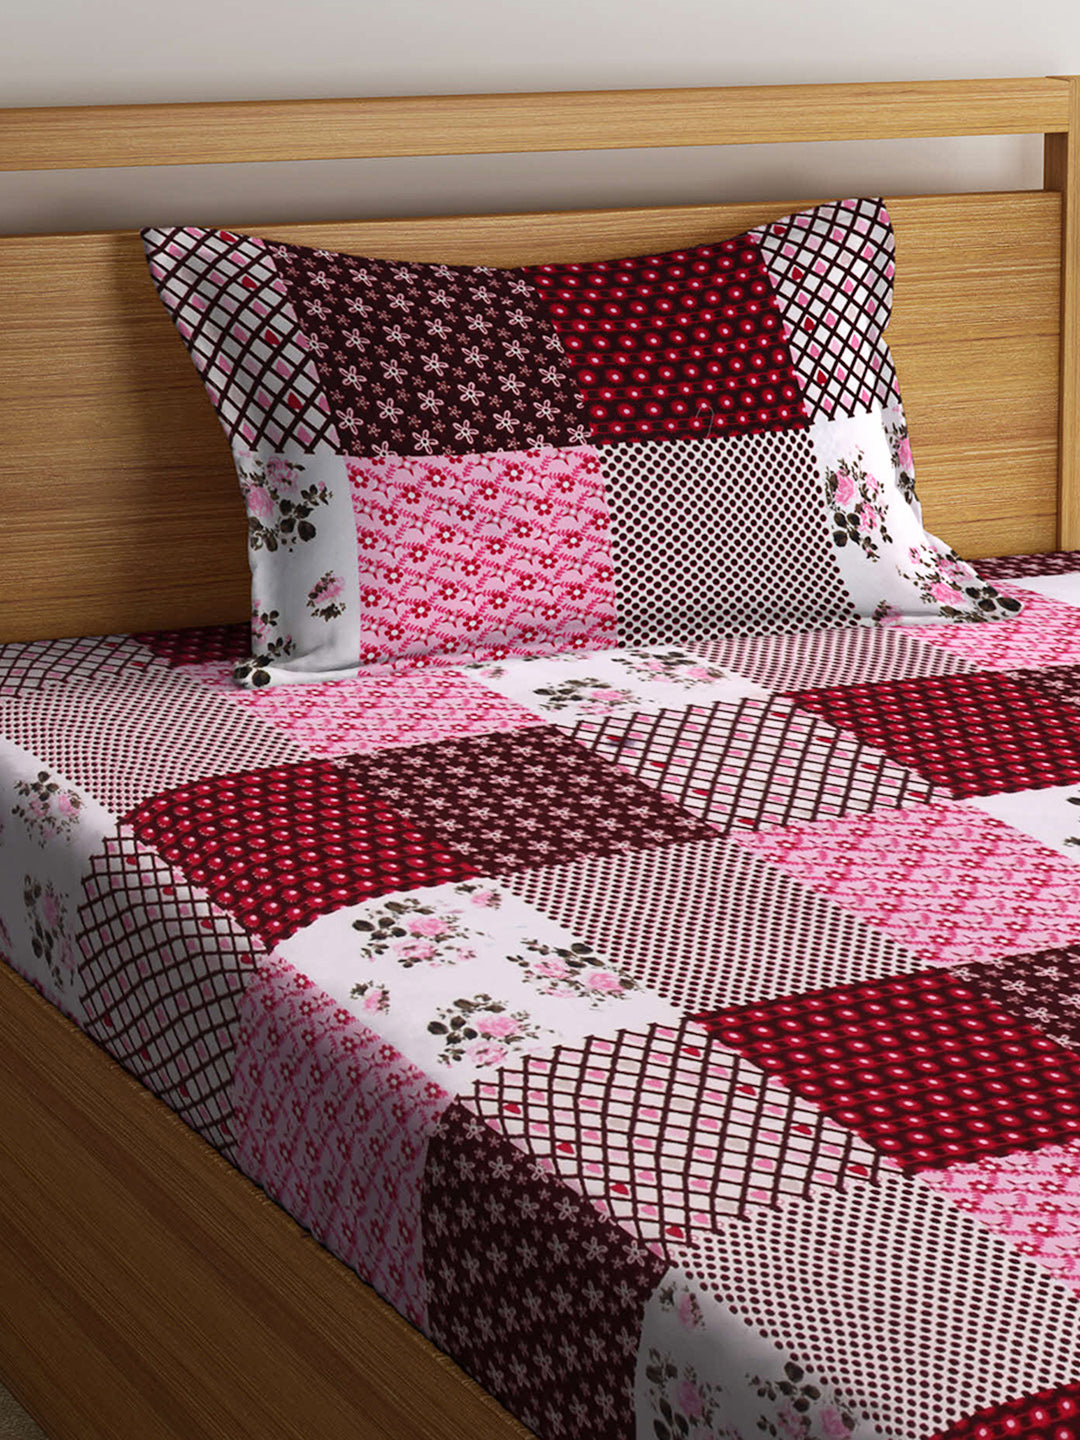 Arrabi Multi Geometric TC Cotton Blend Single Size Fitted Bedsheet with 1 Pillow Cover (220 X 150 cm)